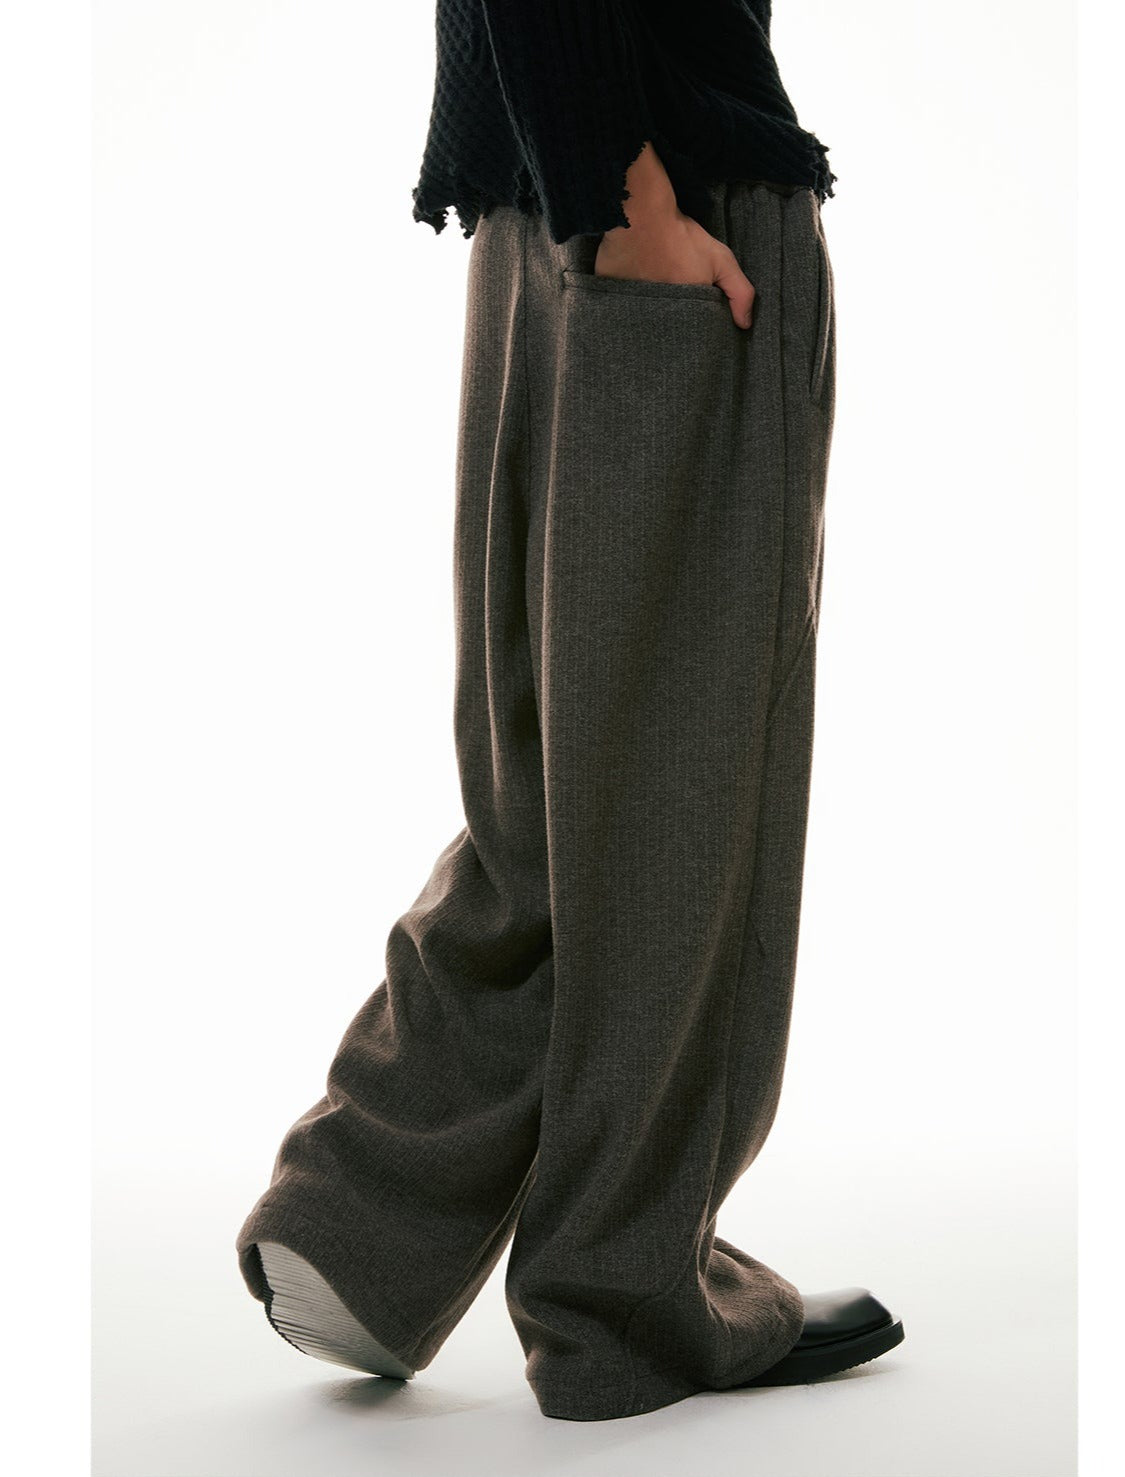 Wide Leg Cut Lined Pants Korean Street Fashion Pants By Funky Fun Shop Online at OH Vault